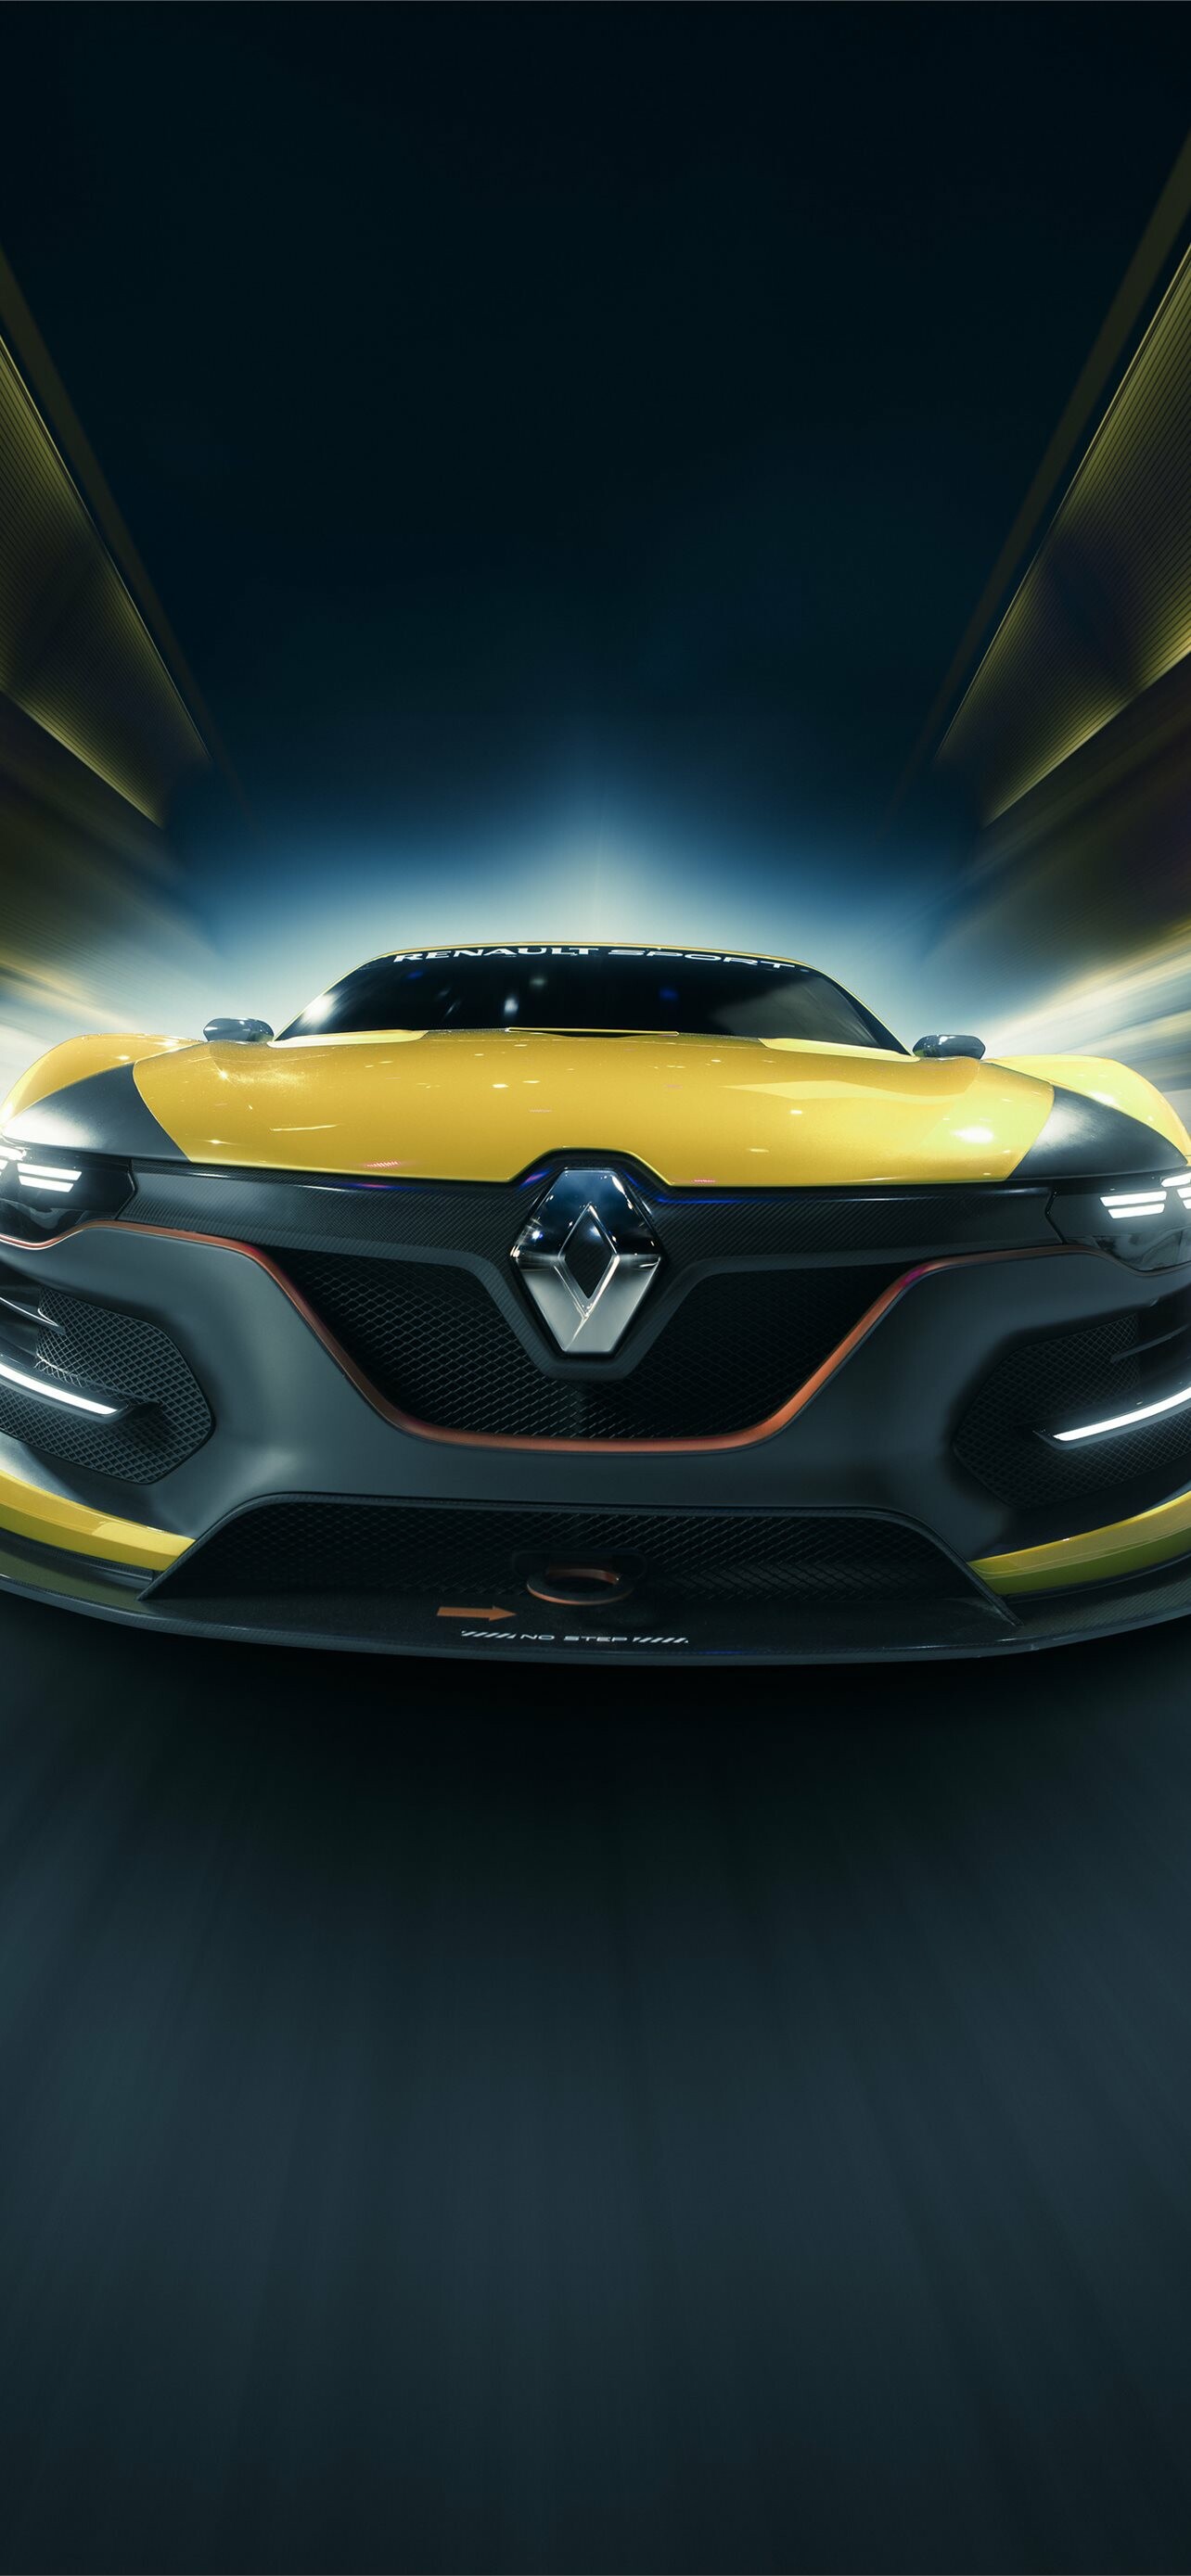 Renault: A historic mobility brand and leader of electric vehicles in Europe. 1290x2780 HD Wallpaper.